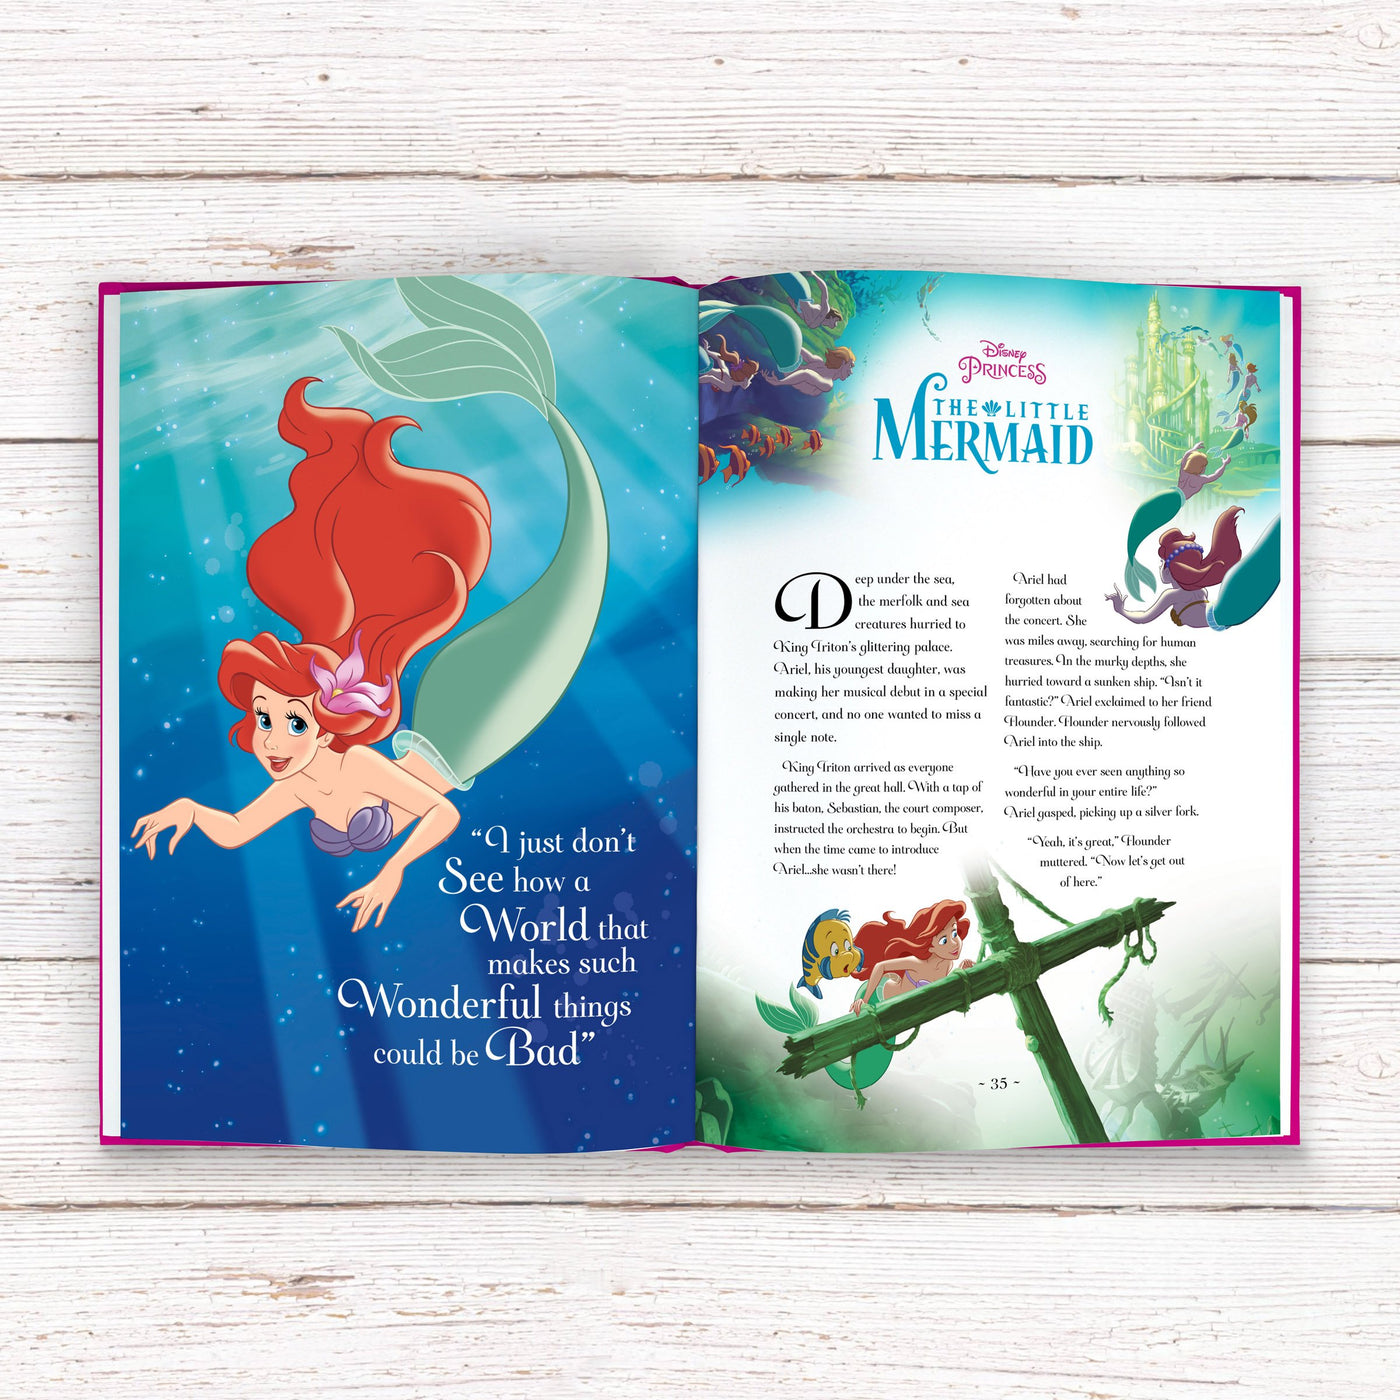 Personalised Disney Princess Ultimate Collection - Shop Personalised Gifts